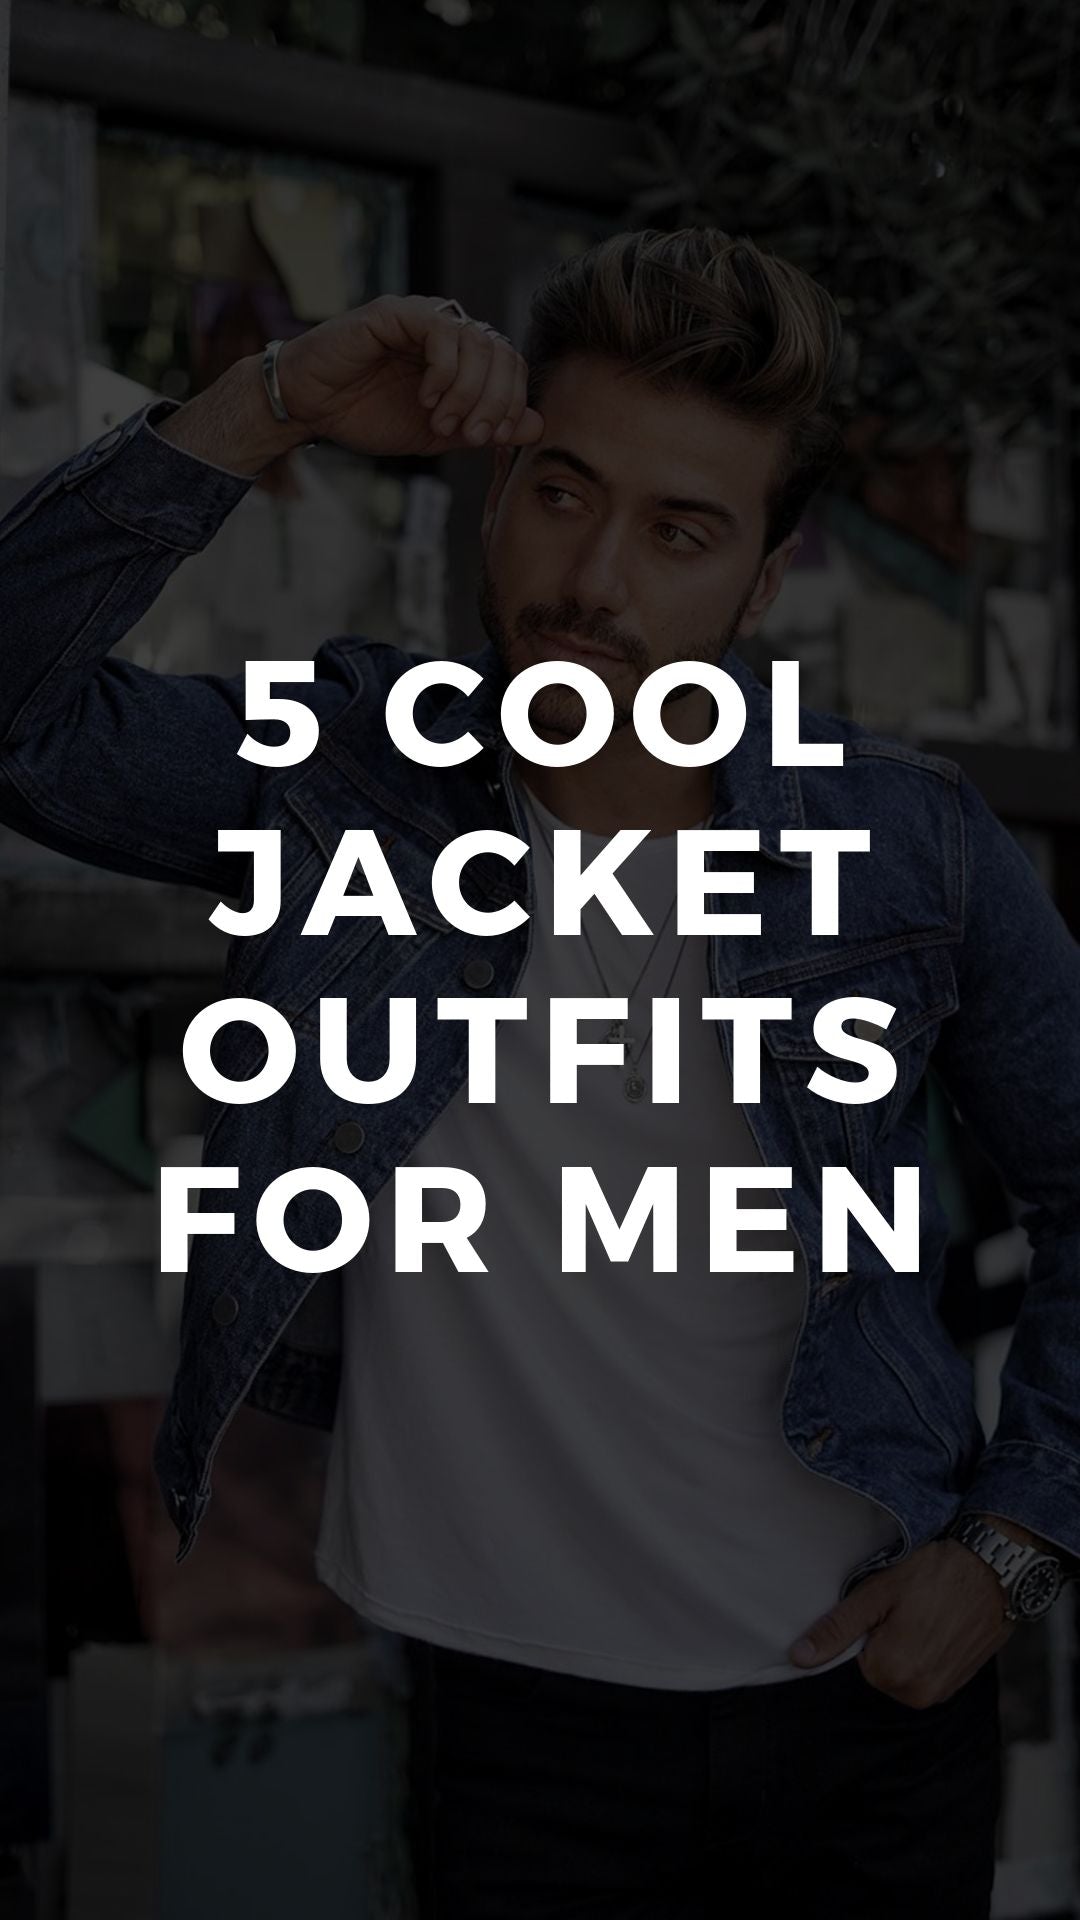 5 Jacket Outfits For Men #jacket #outfits #mensfashion